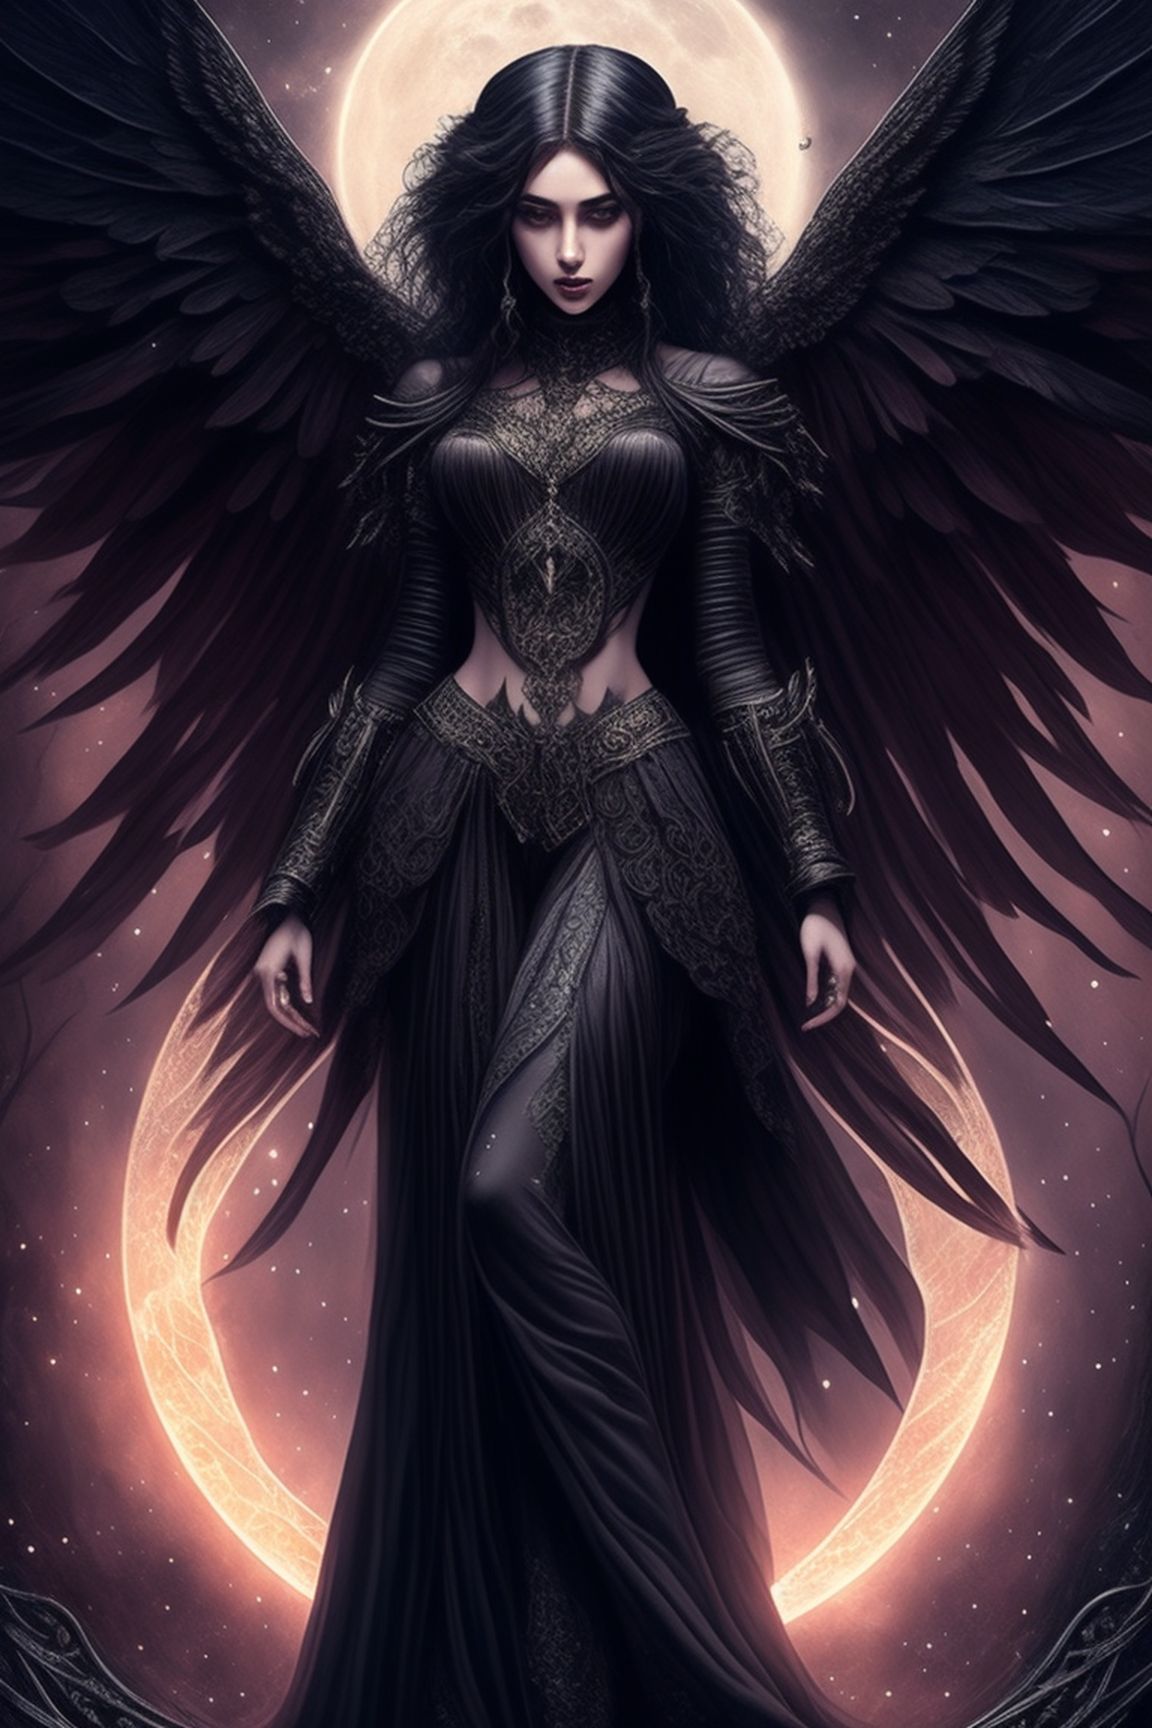 Centered, Photography, Realistic, ornate, intricate details, beautiful dark angel, gilter, moon scene, galaxy, gothic style, hyper-realistic fantasy art, digital illustration, black pastel, magic witchcraft, Cinematic, Beautiful, Ultra detailed, Dramatic Lighting